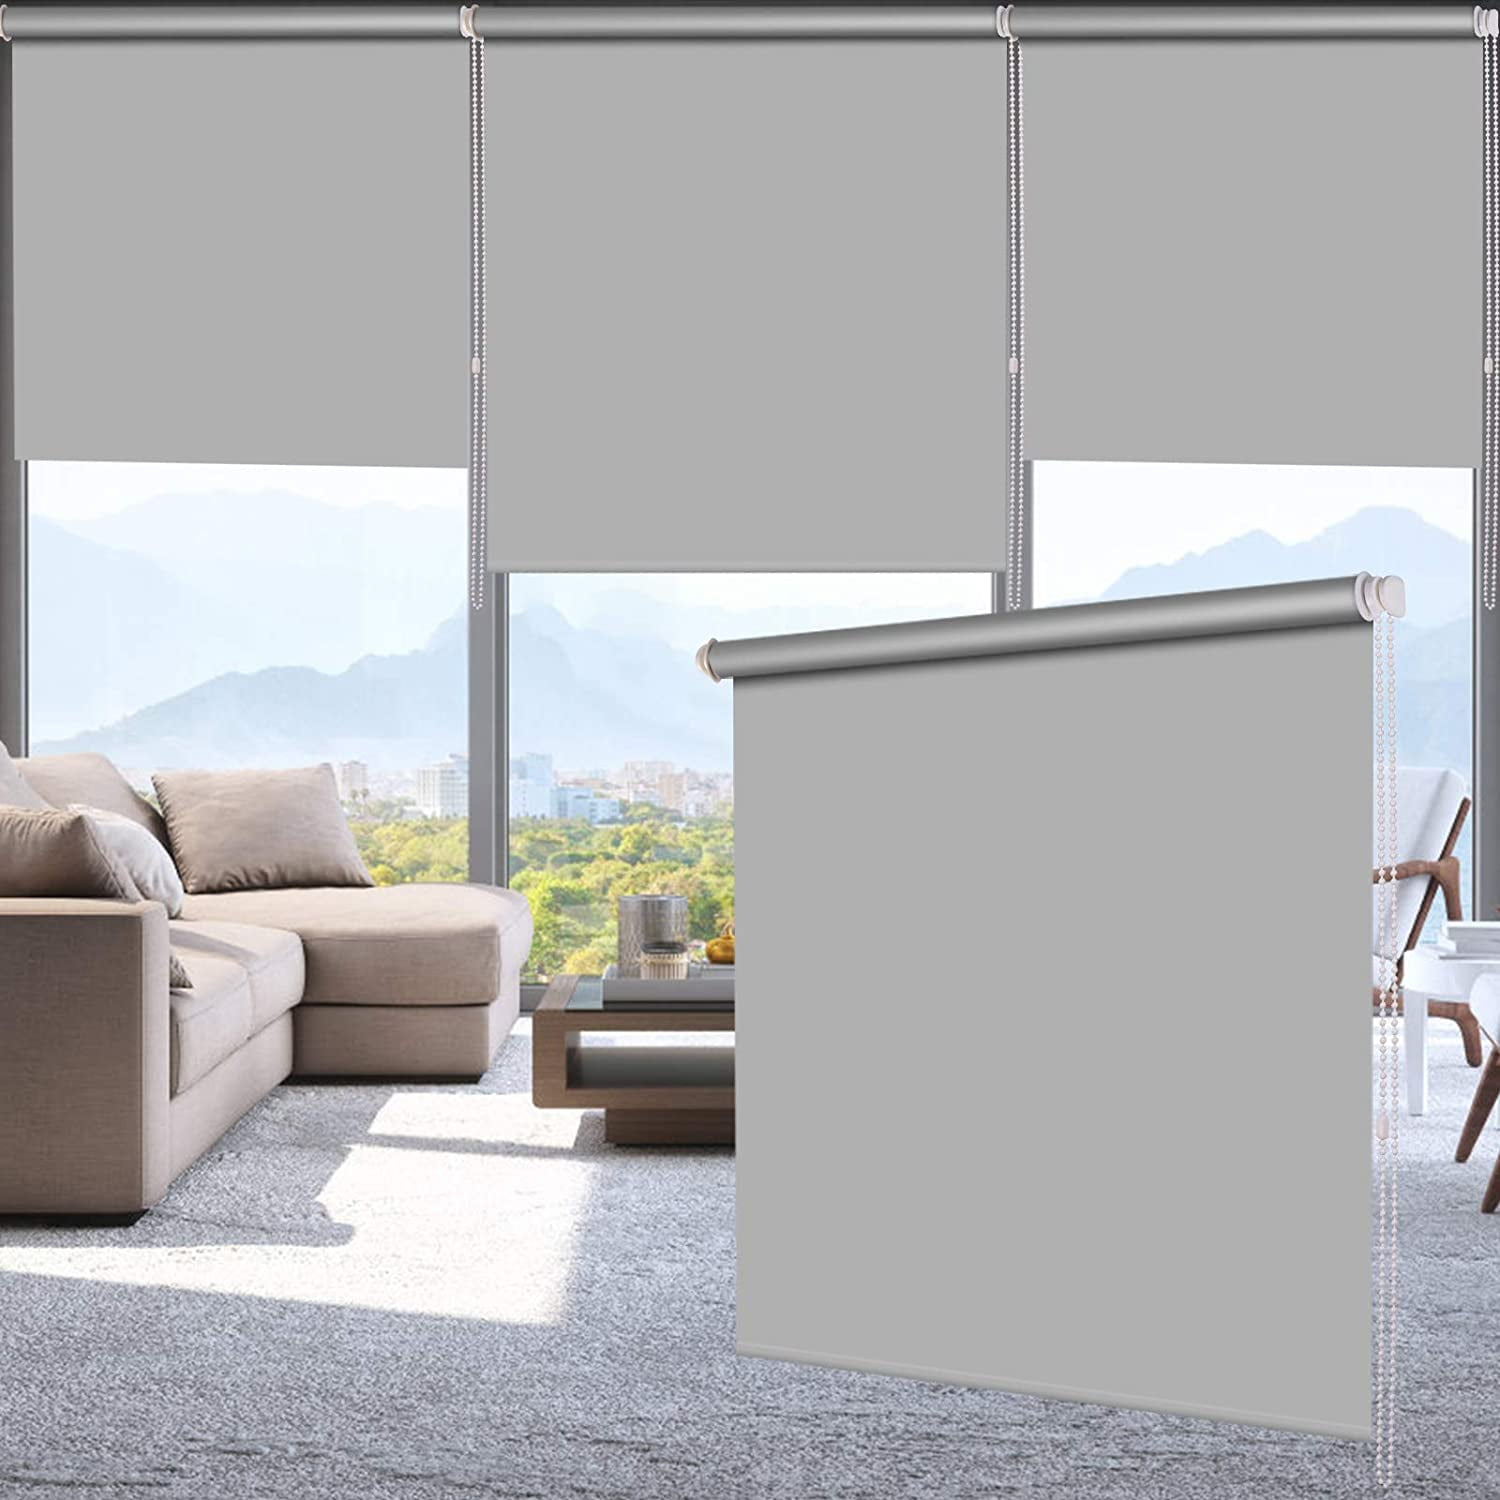 Thermal Blackout Roller Blinds Express Made To Measure Blackout Blinds 